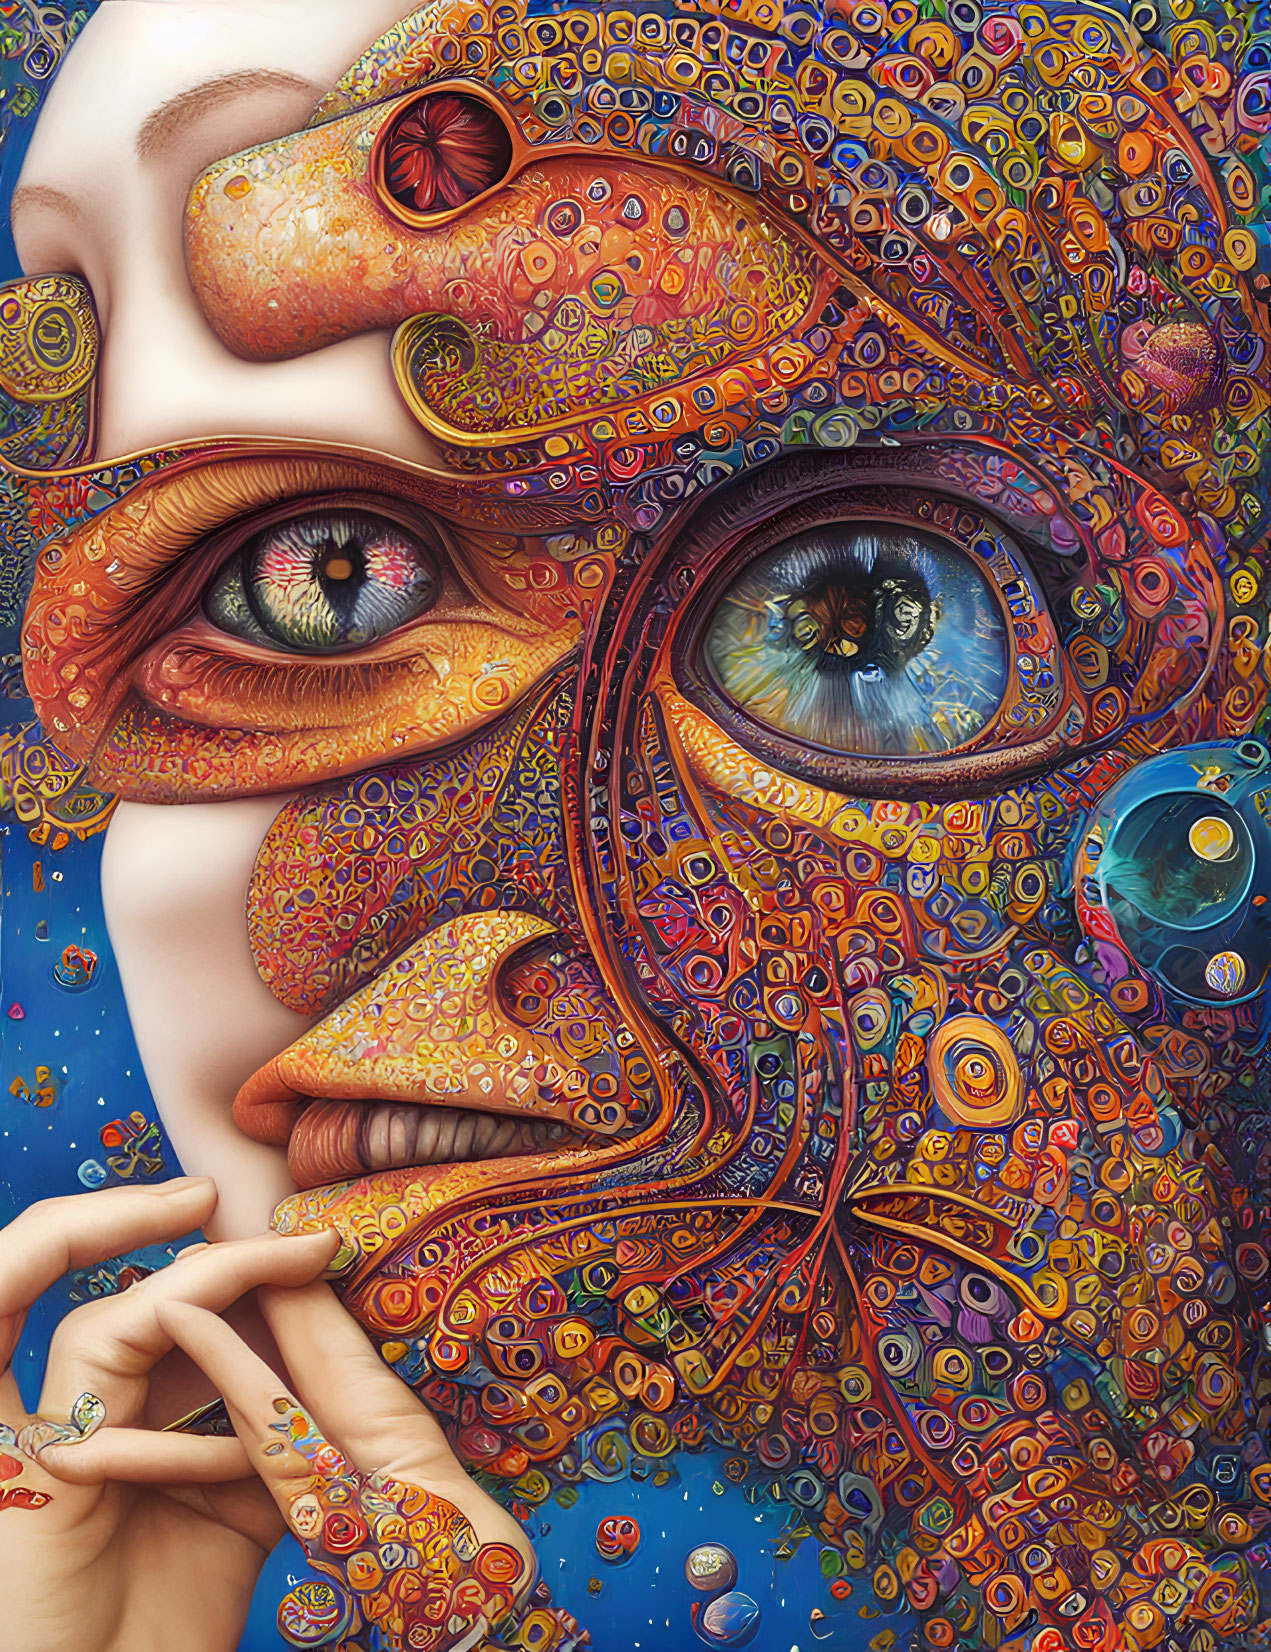 Detailed Surreal Portrait with Vibrant Colors and Patterns